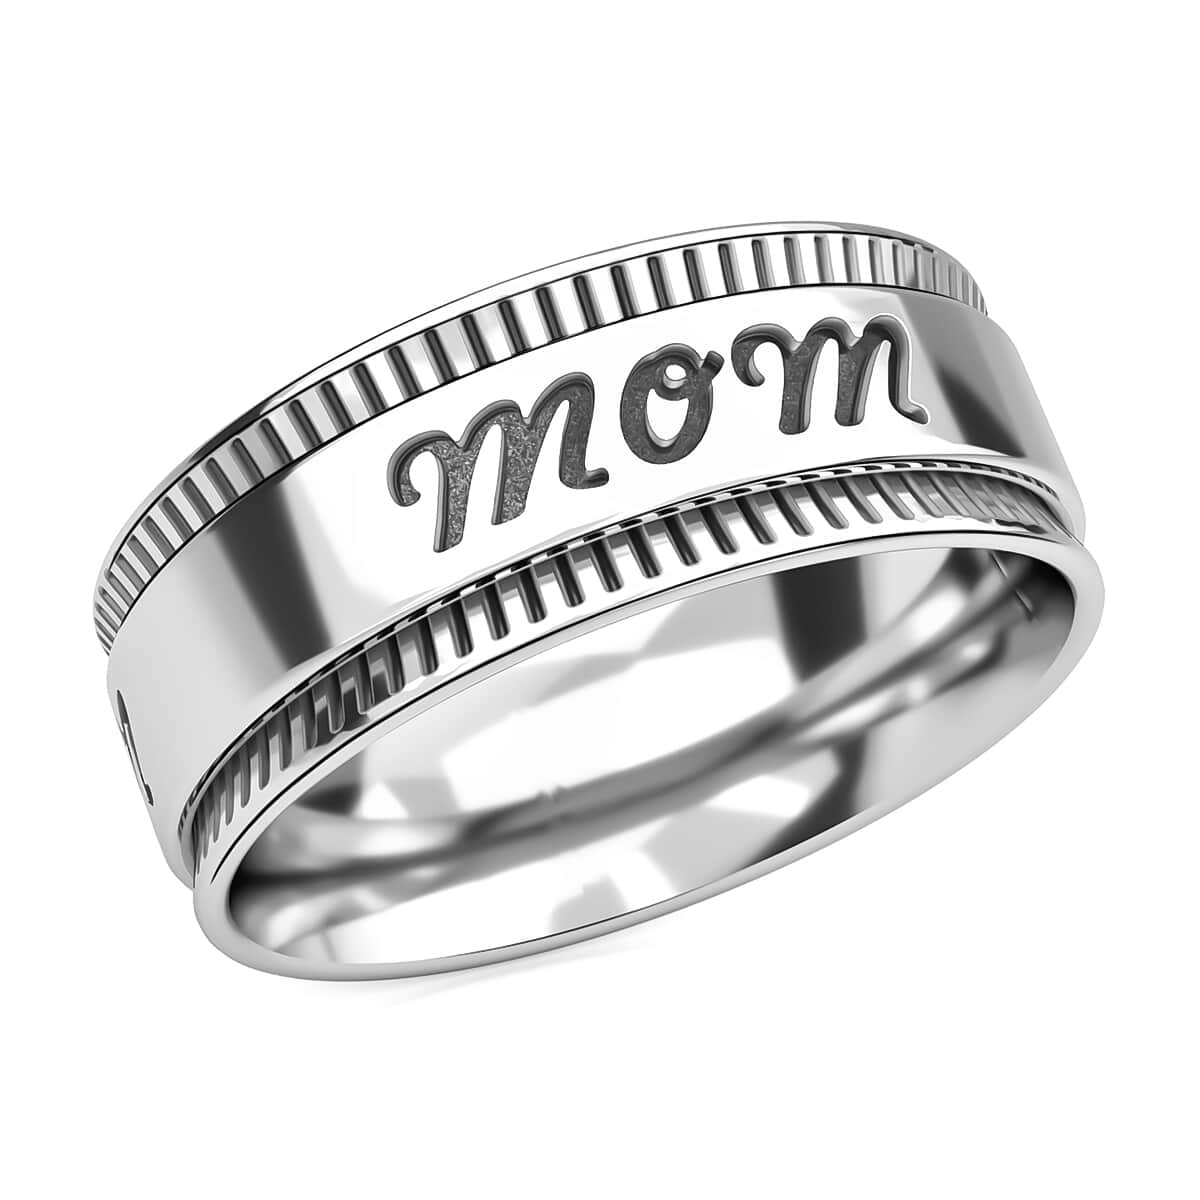 Mom Spinner Ring in Sterling Silver, Anxiety Ring for Women, Fidget Rings for Anxiety for Women, Stress Relieving Anxiety Ring, Promise Rings (Size 7.0) 5 Grams image number 0